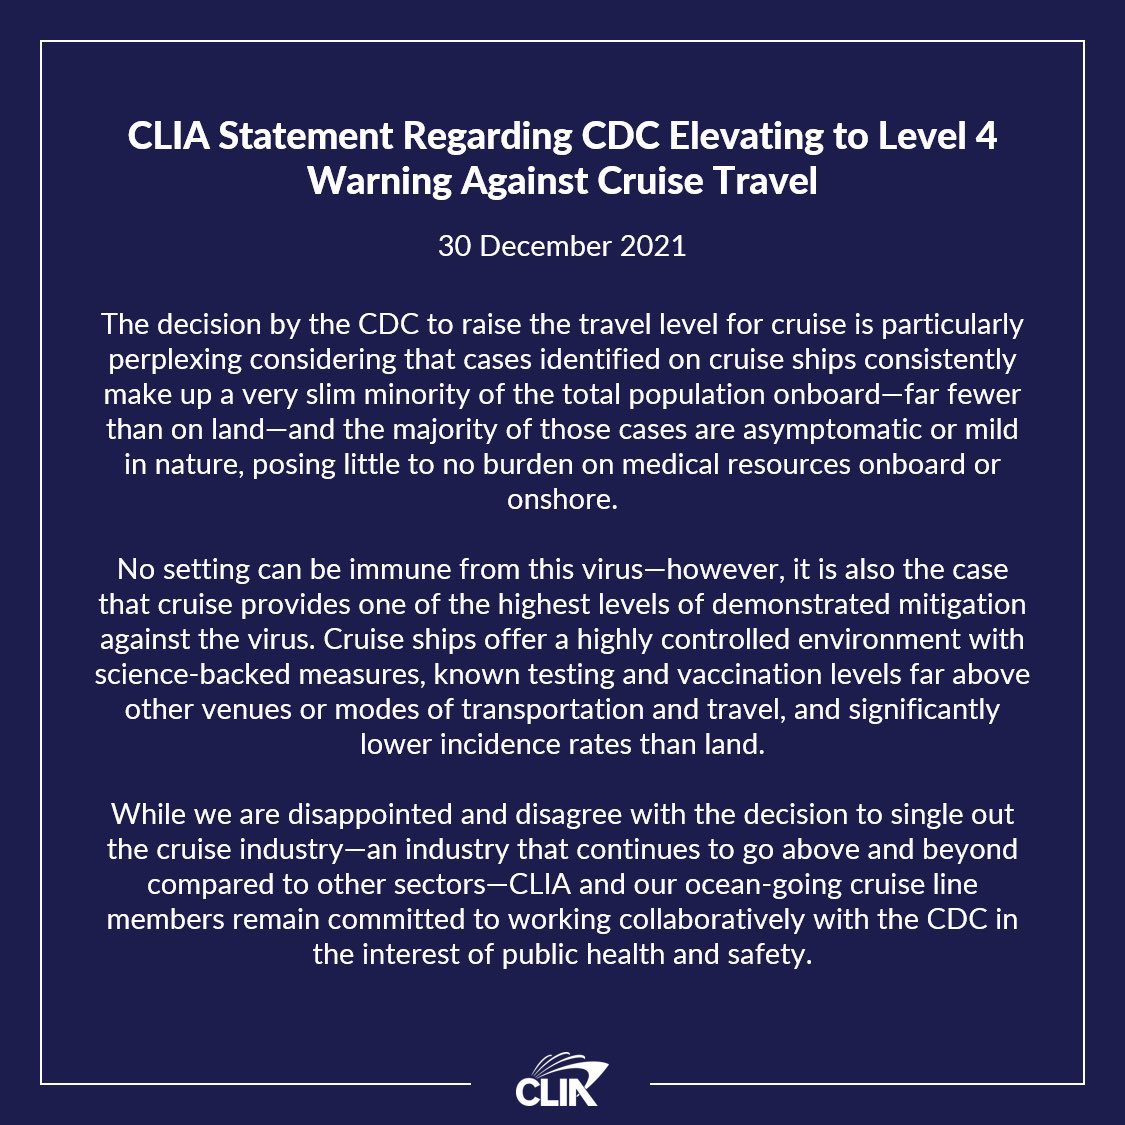 CLIA Statement in Response to CDC Level 4 Warning Against Cruise Travel (30 December 2021)